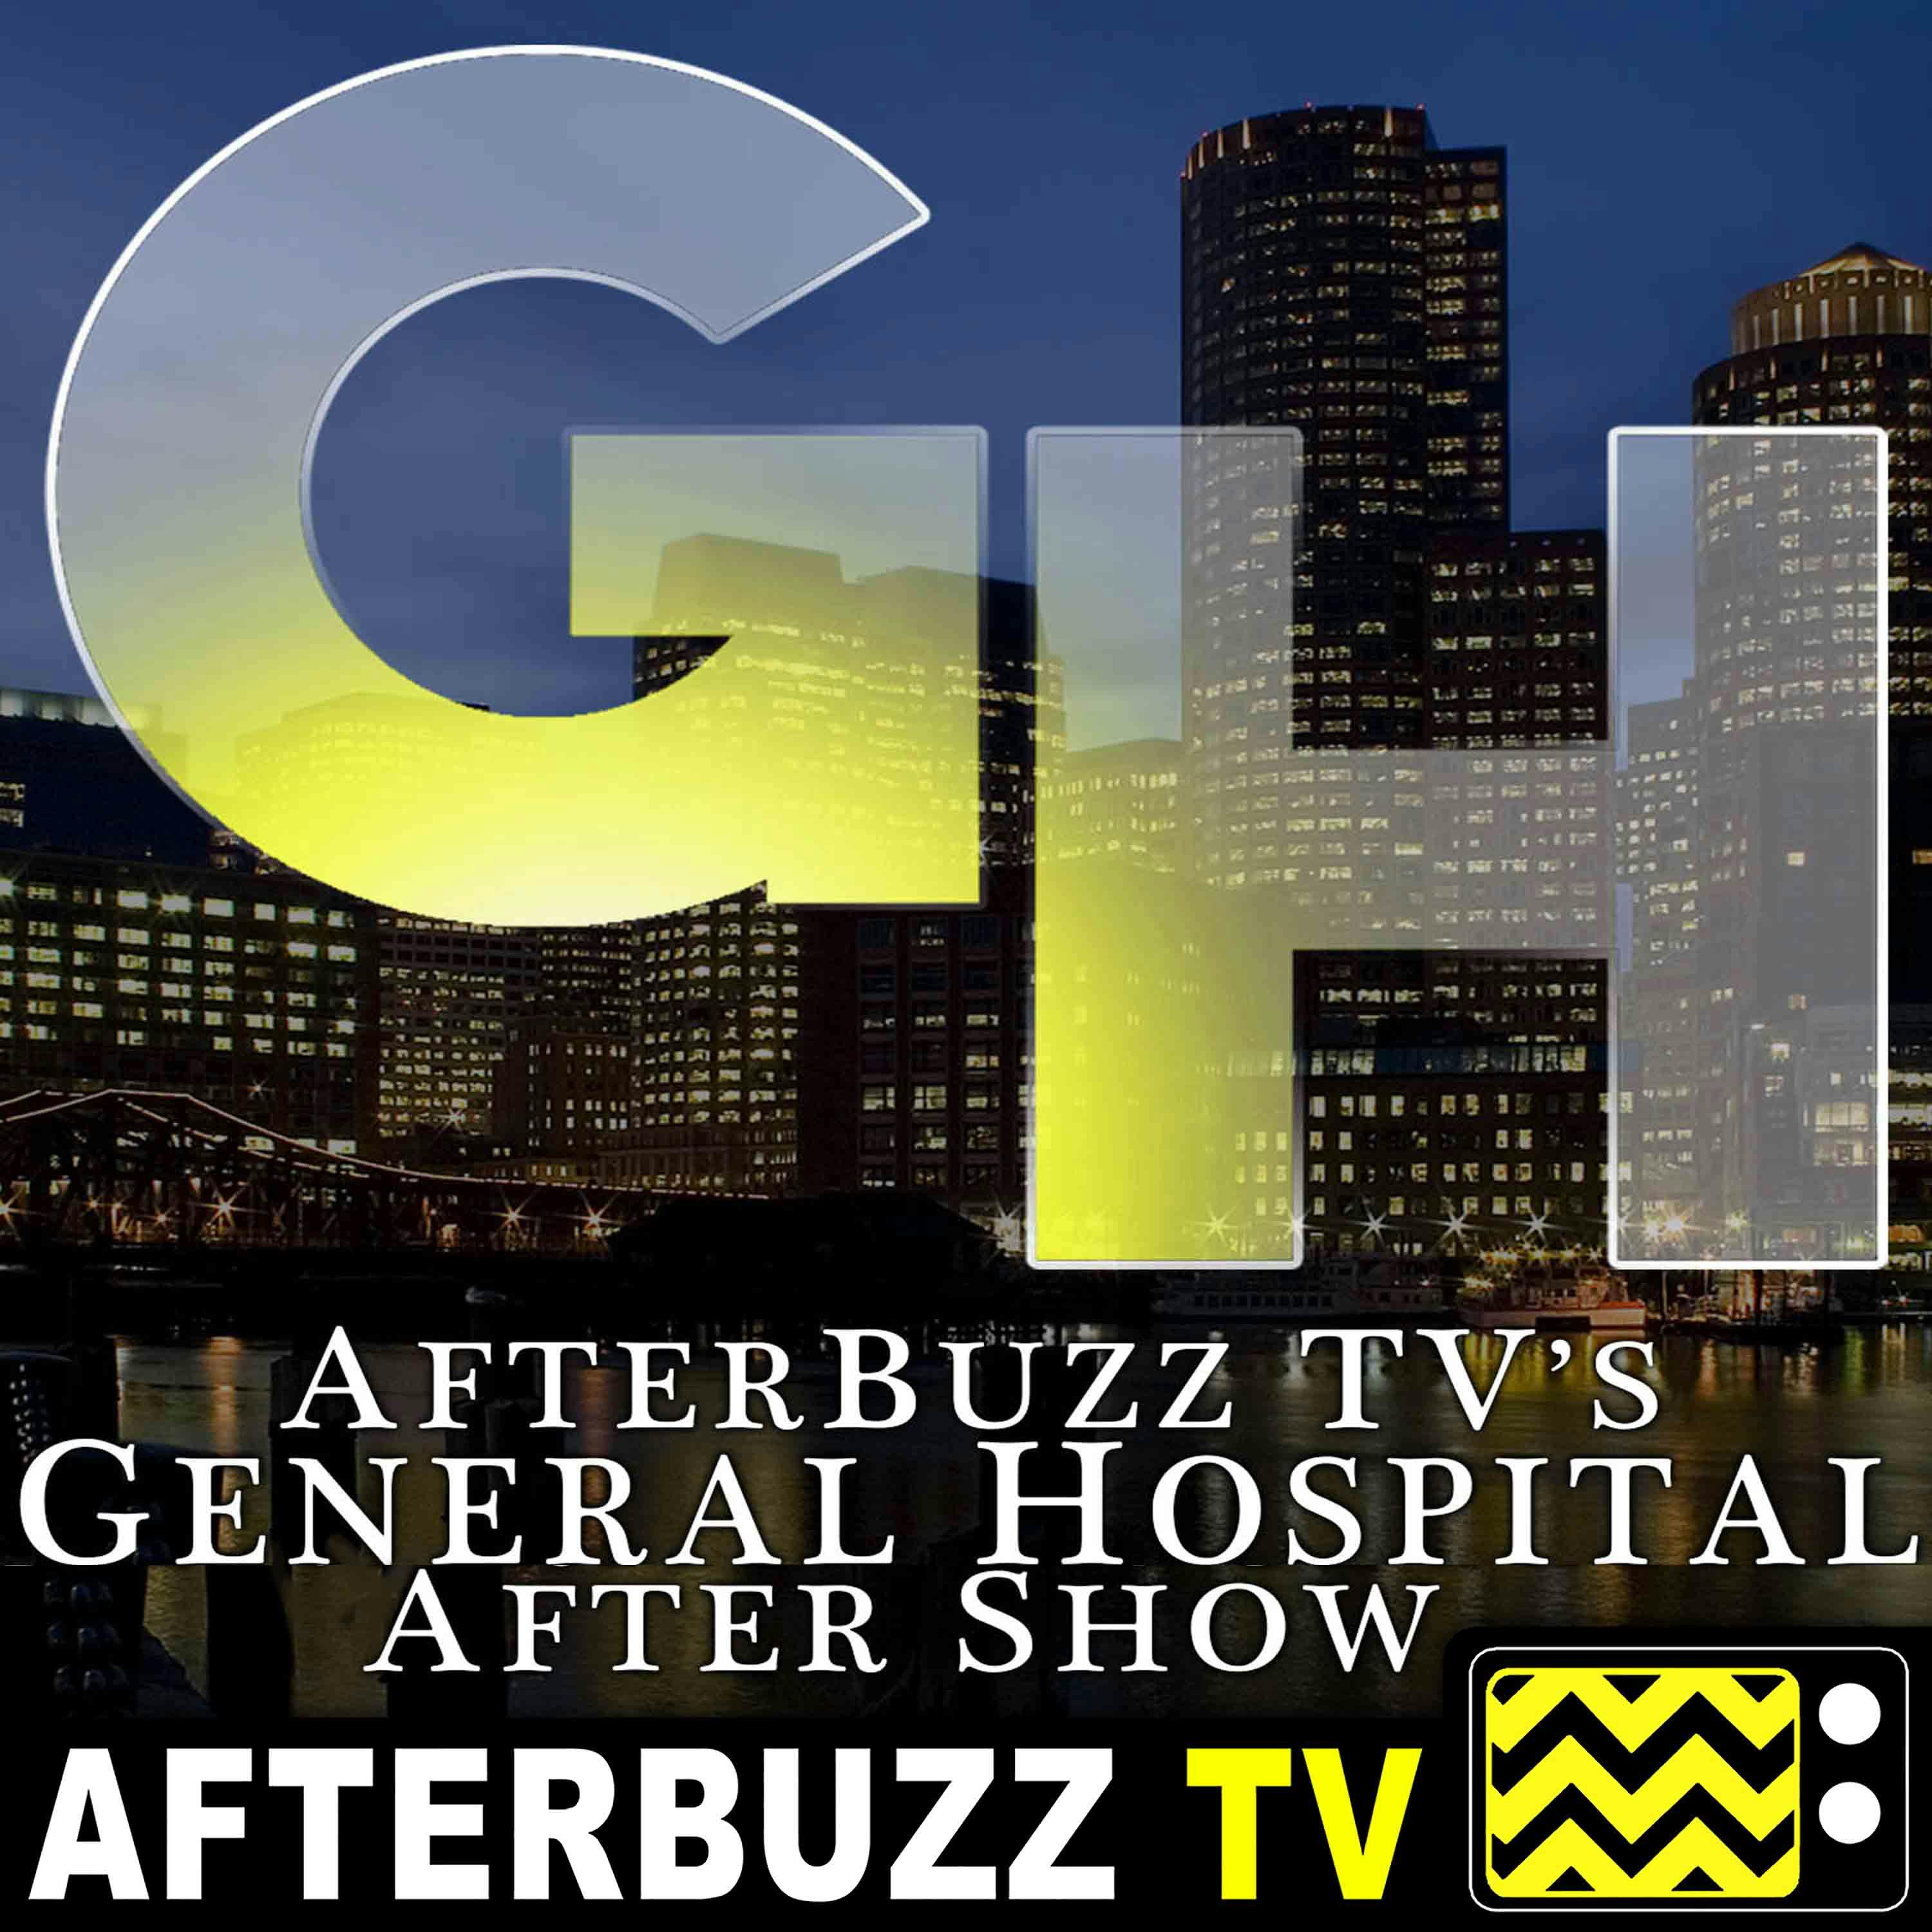 Review Of General Hospital for March 11th - March 15th, 2019